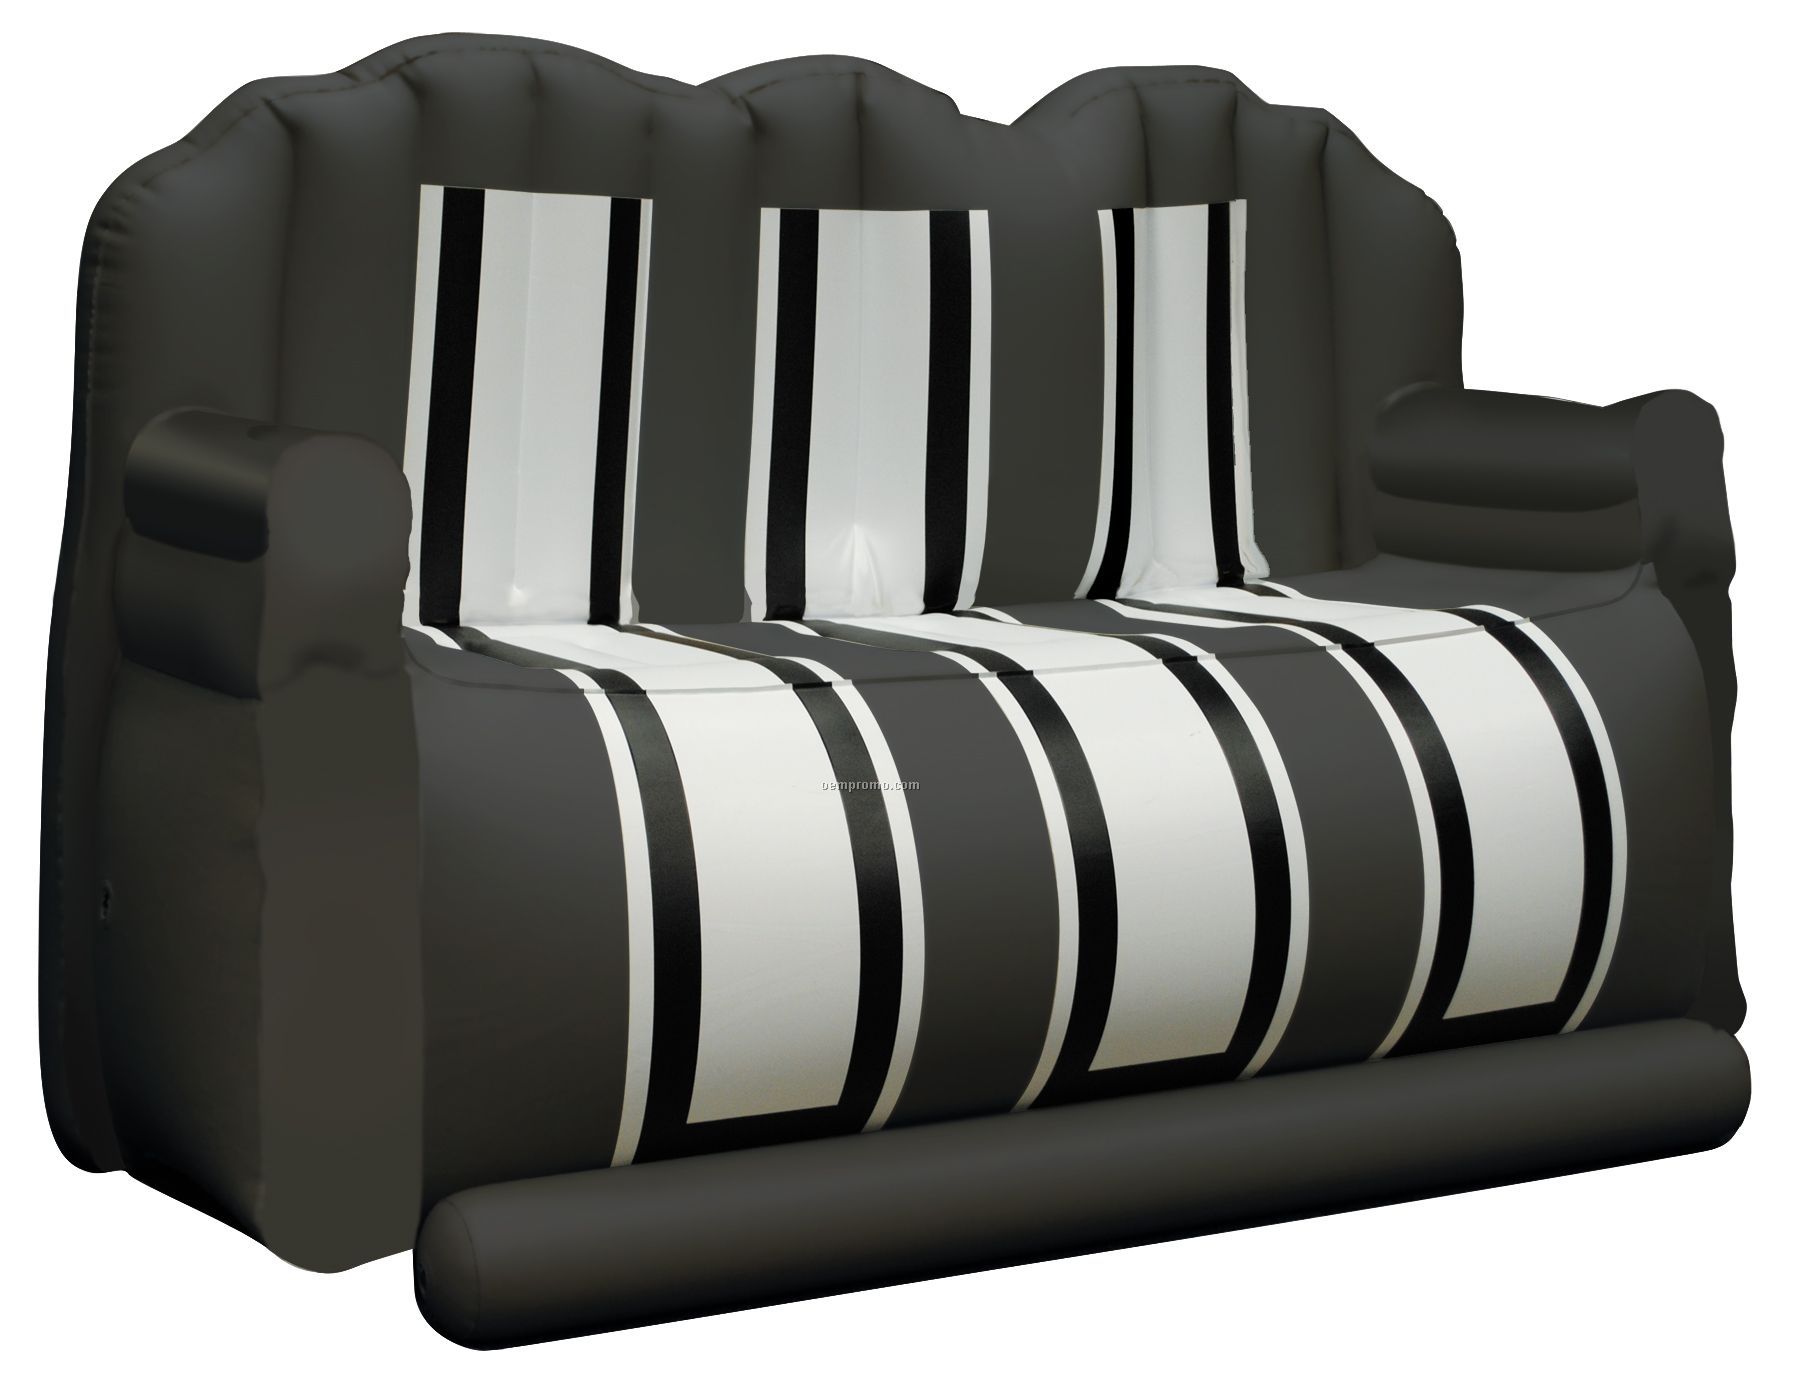 Inflate-a-seat "Couch": Black/White/Black